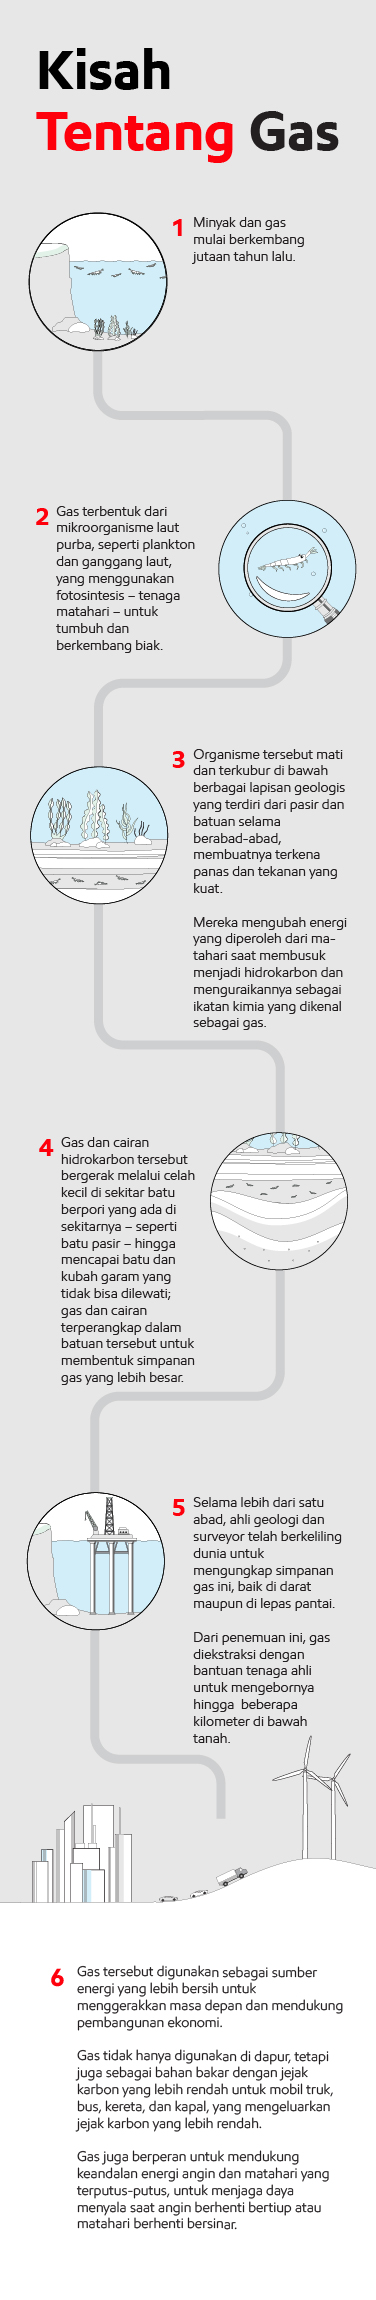 The story of gas inforaphic